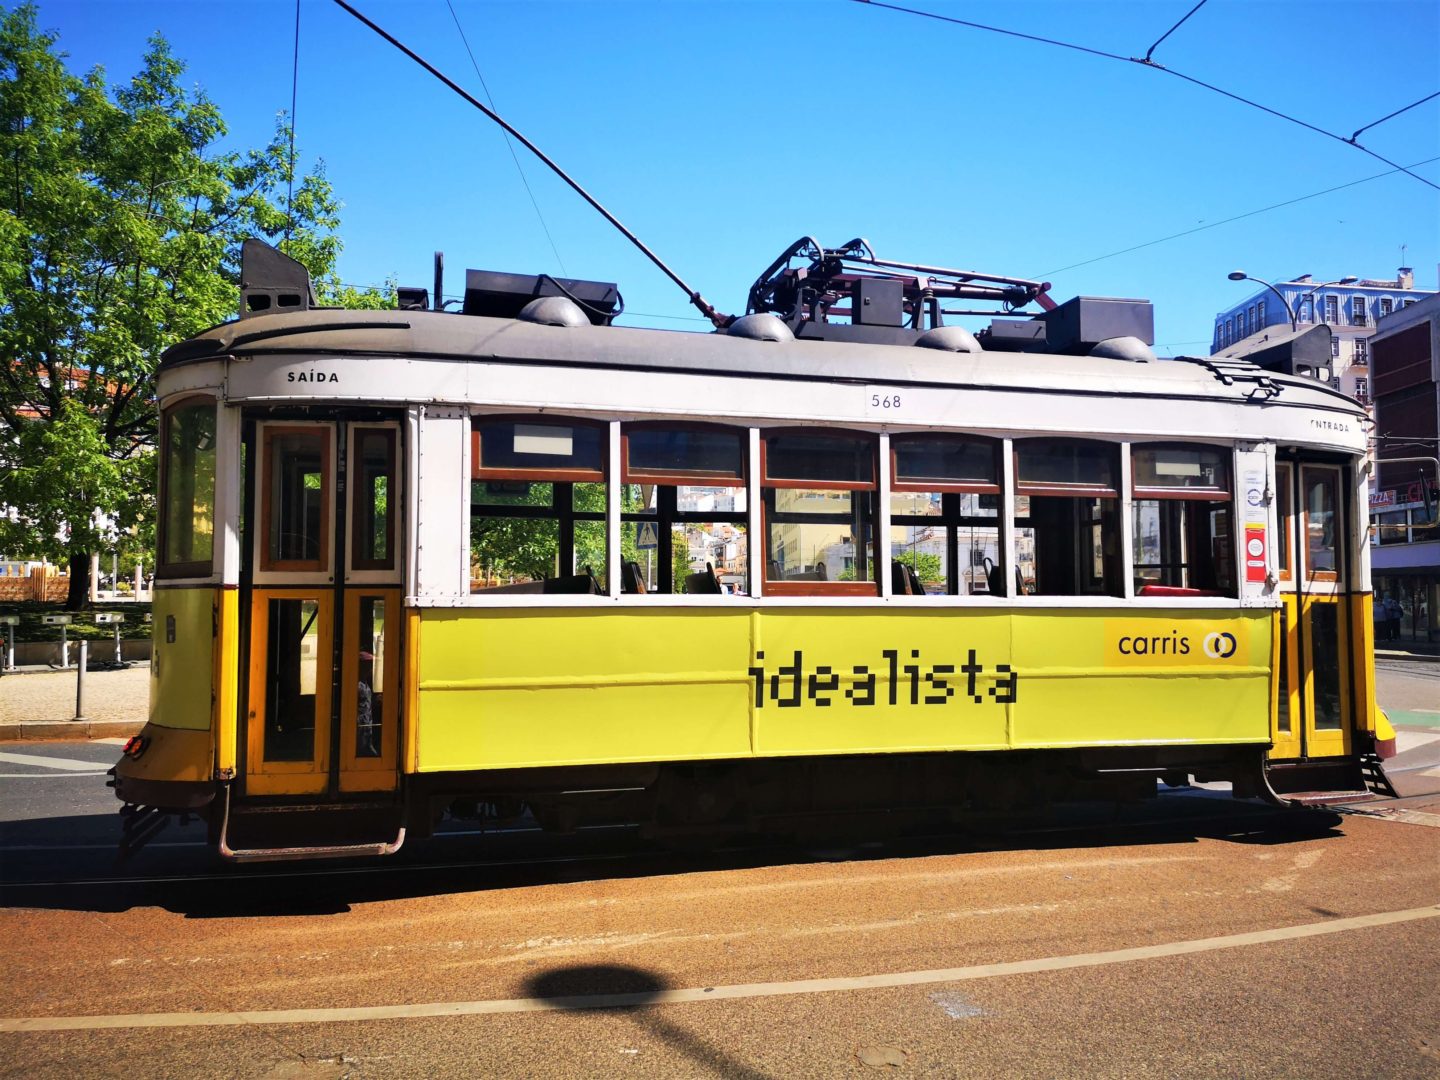 A traditional yellow tram in Lisbon.